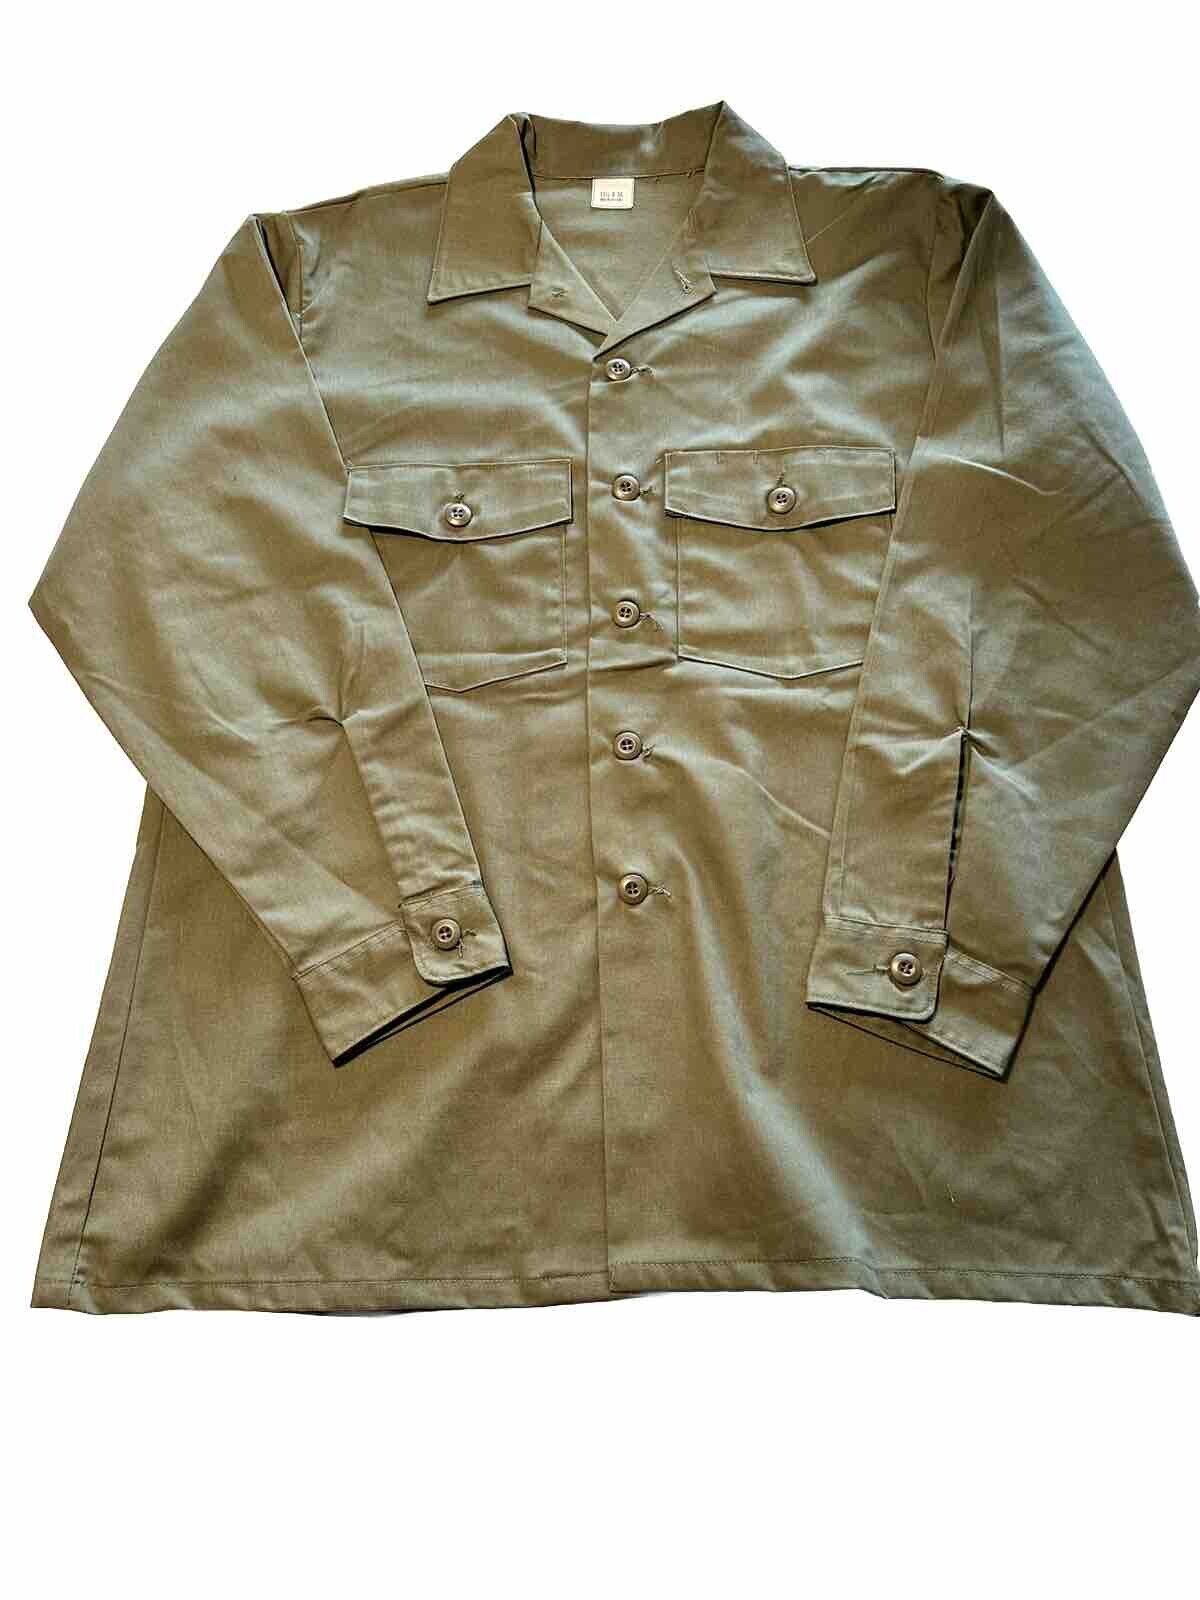 Men’s Vintage Green Army Military Shirt in Size 17.5 x 34